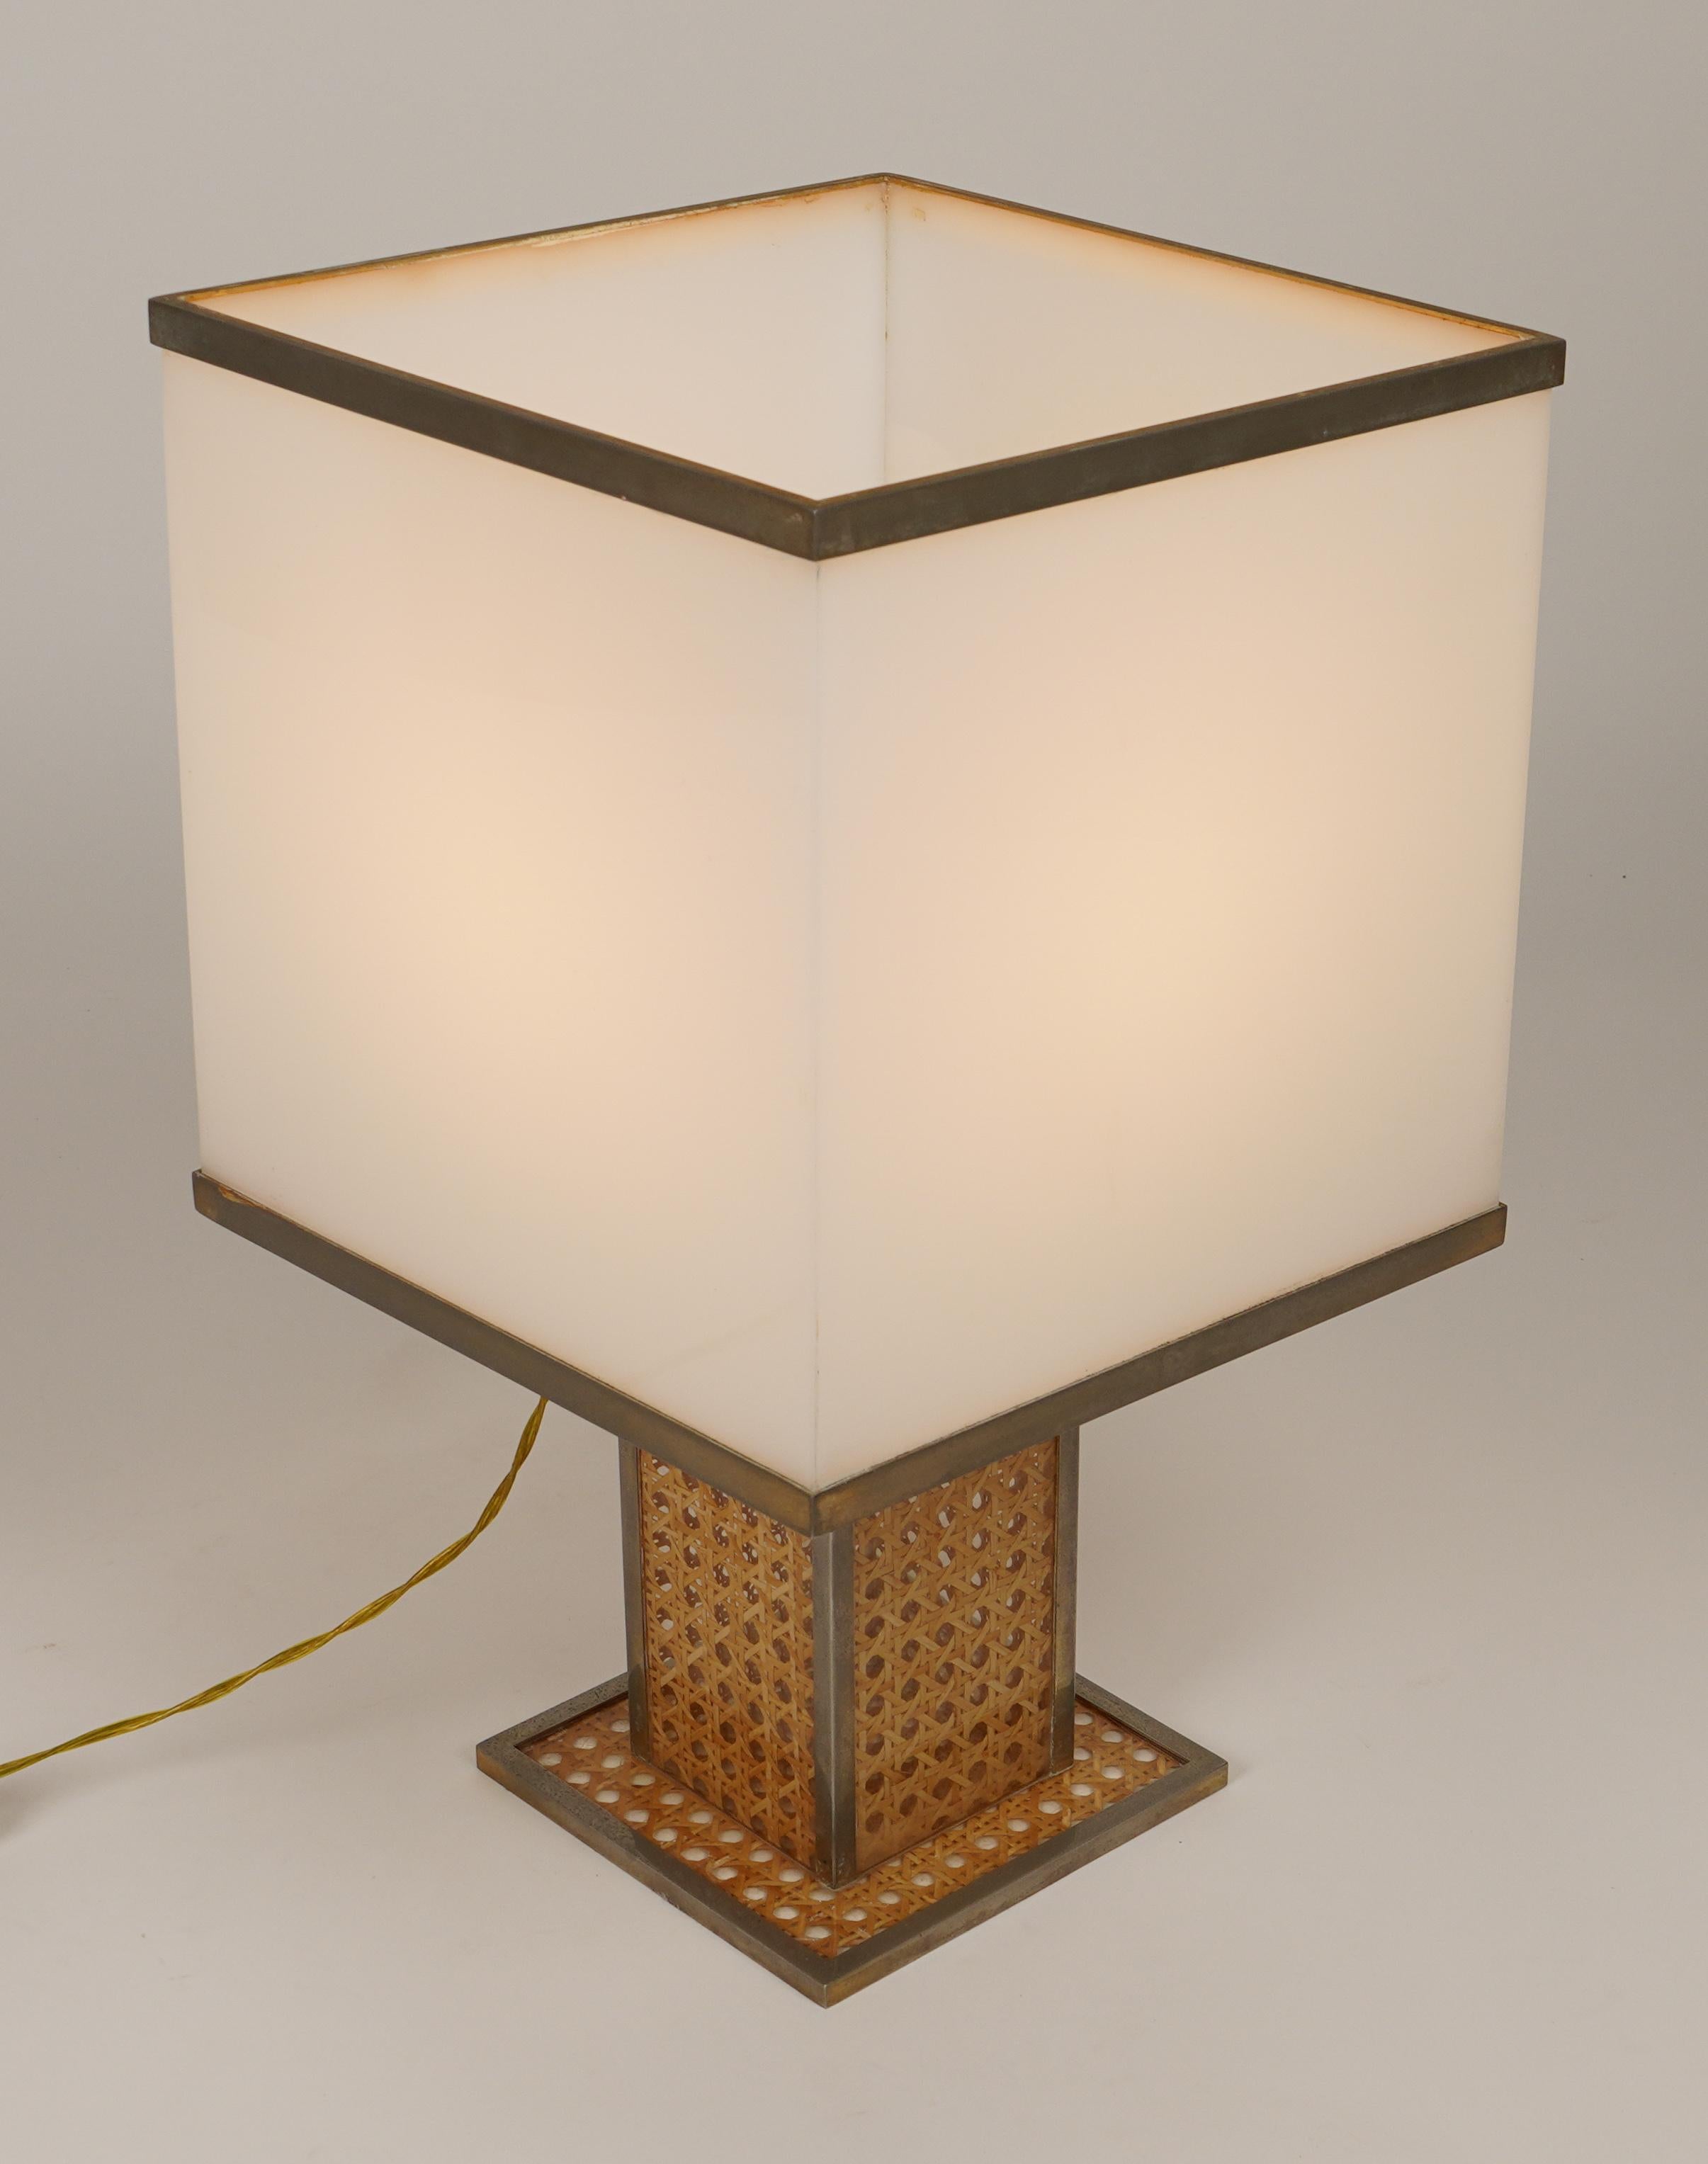 Table Lamp in Lucite, Rattan and Brass Christian Dior Style, Italy 1970s For Sale 7